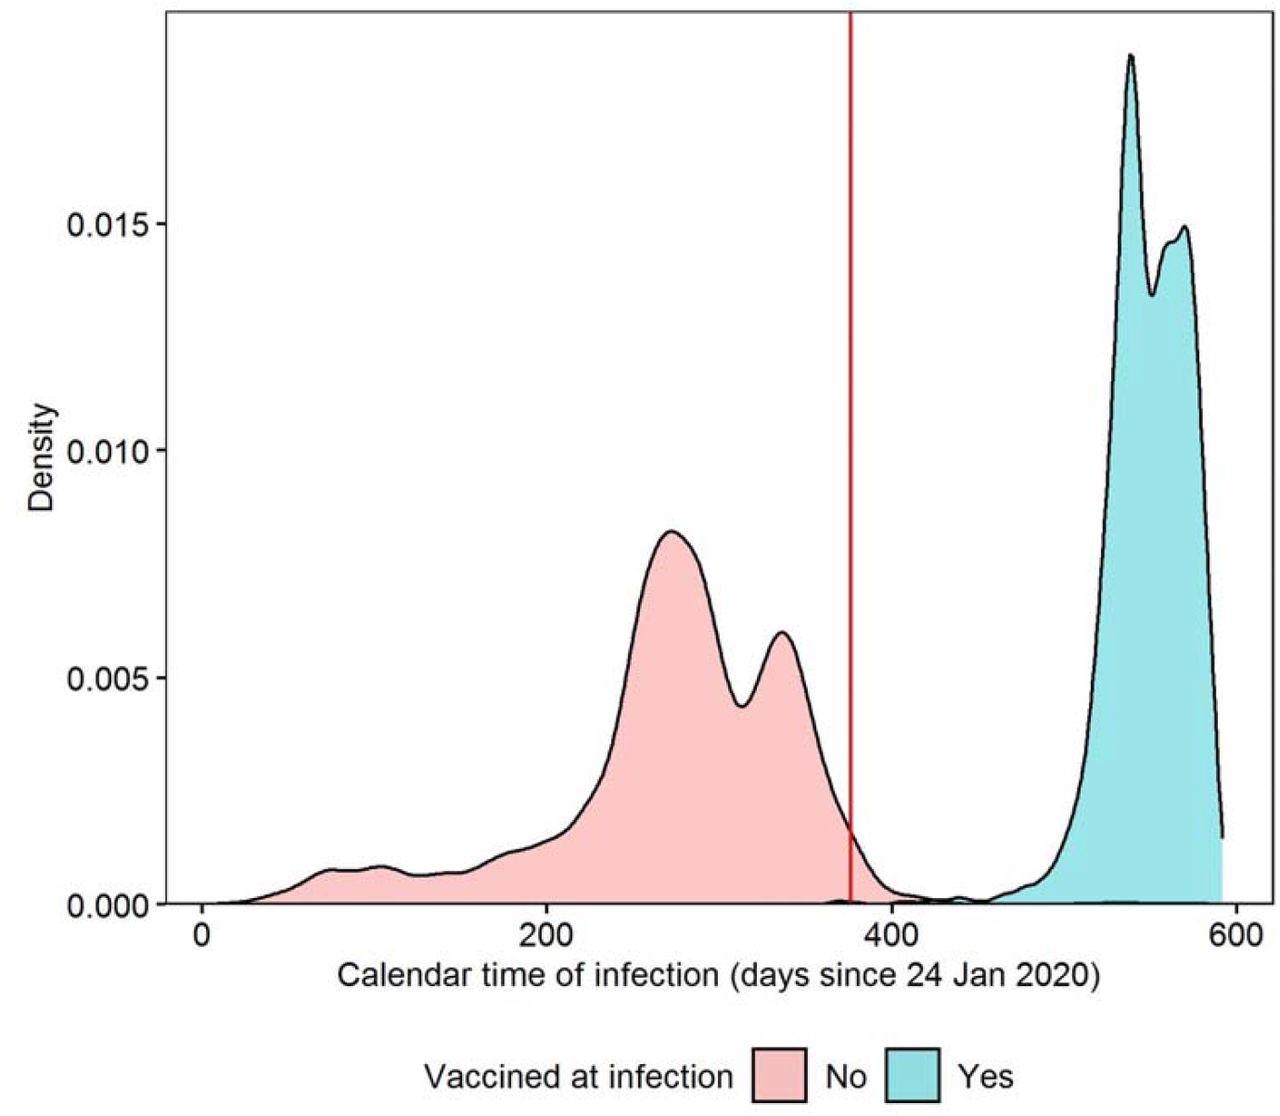 Density plot of calendar time of first infection, stratified by whether study participants were double-vaccinated ≥14 days before infection; the red line indicates the introduction of the survey question on Long Covid on 3 February 2021 Calendar time of infection calculated as the number of days from 24 January 2020, when the first COVID-19 case was reported in the UK. Density estimated from 3,333 double-vaccinated participants and 9,854 unvaccinated participants before matching.